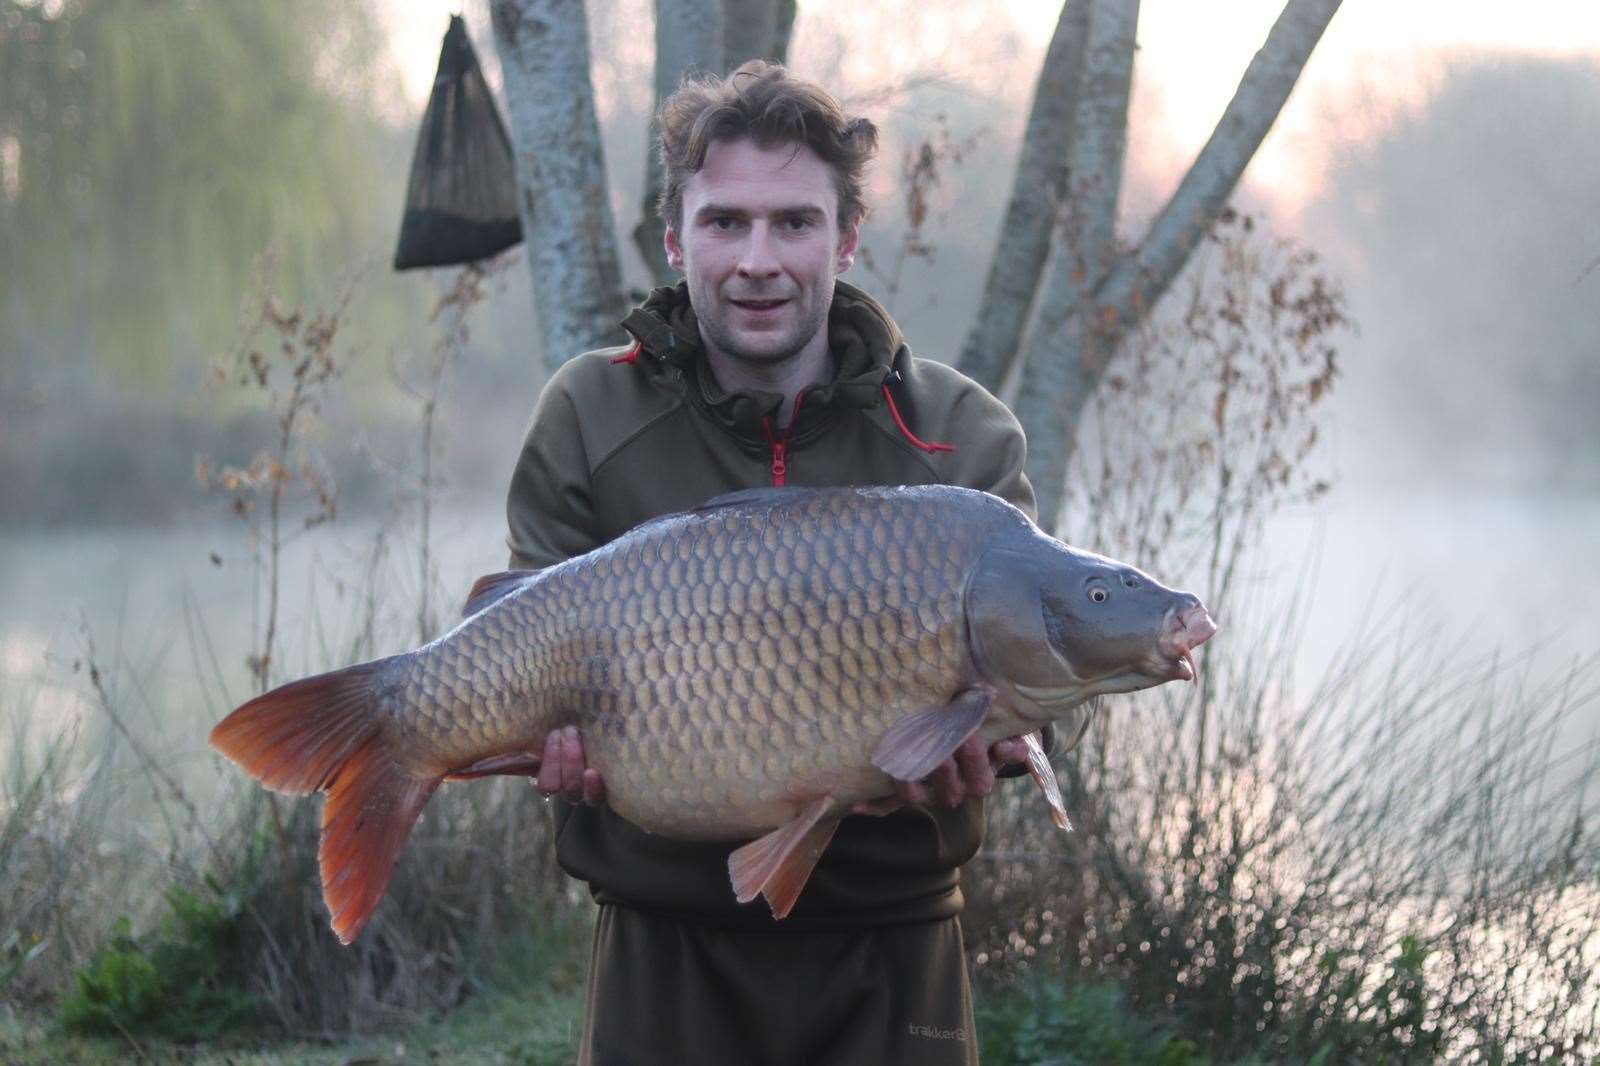 Nathan Caldicott with a 43lb carp, a new lake record for Mousehole lake in Maidstone Kent